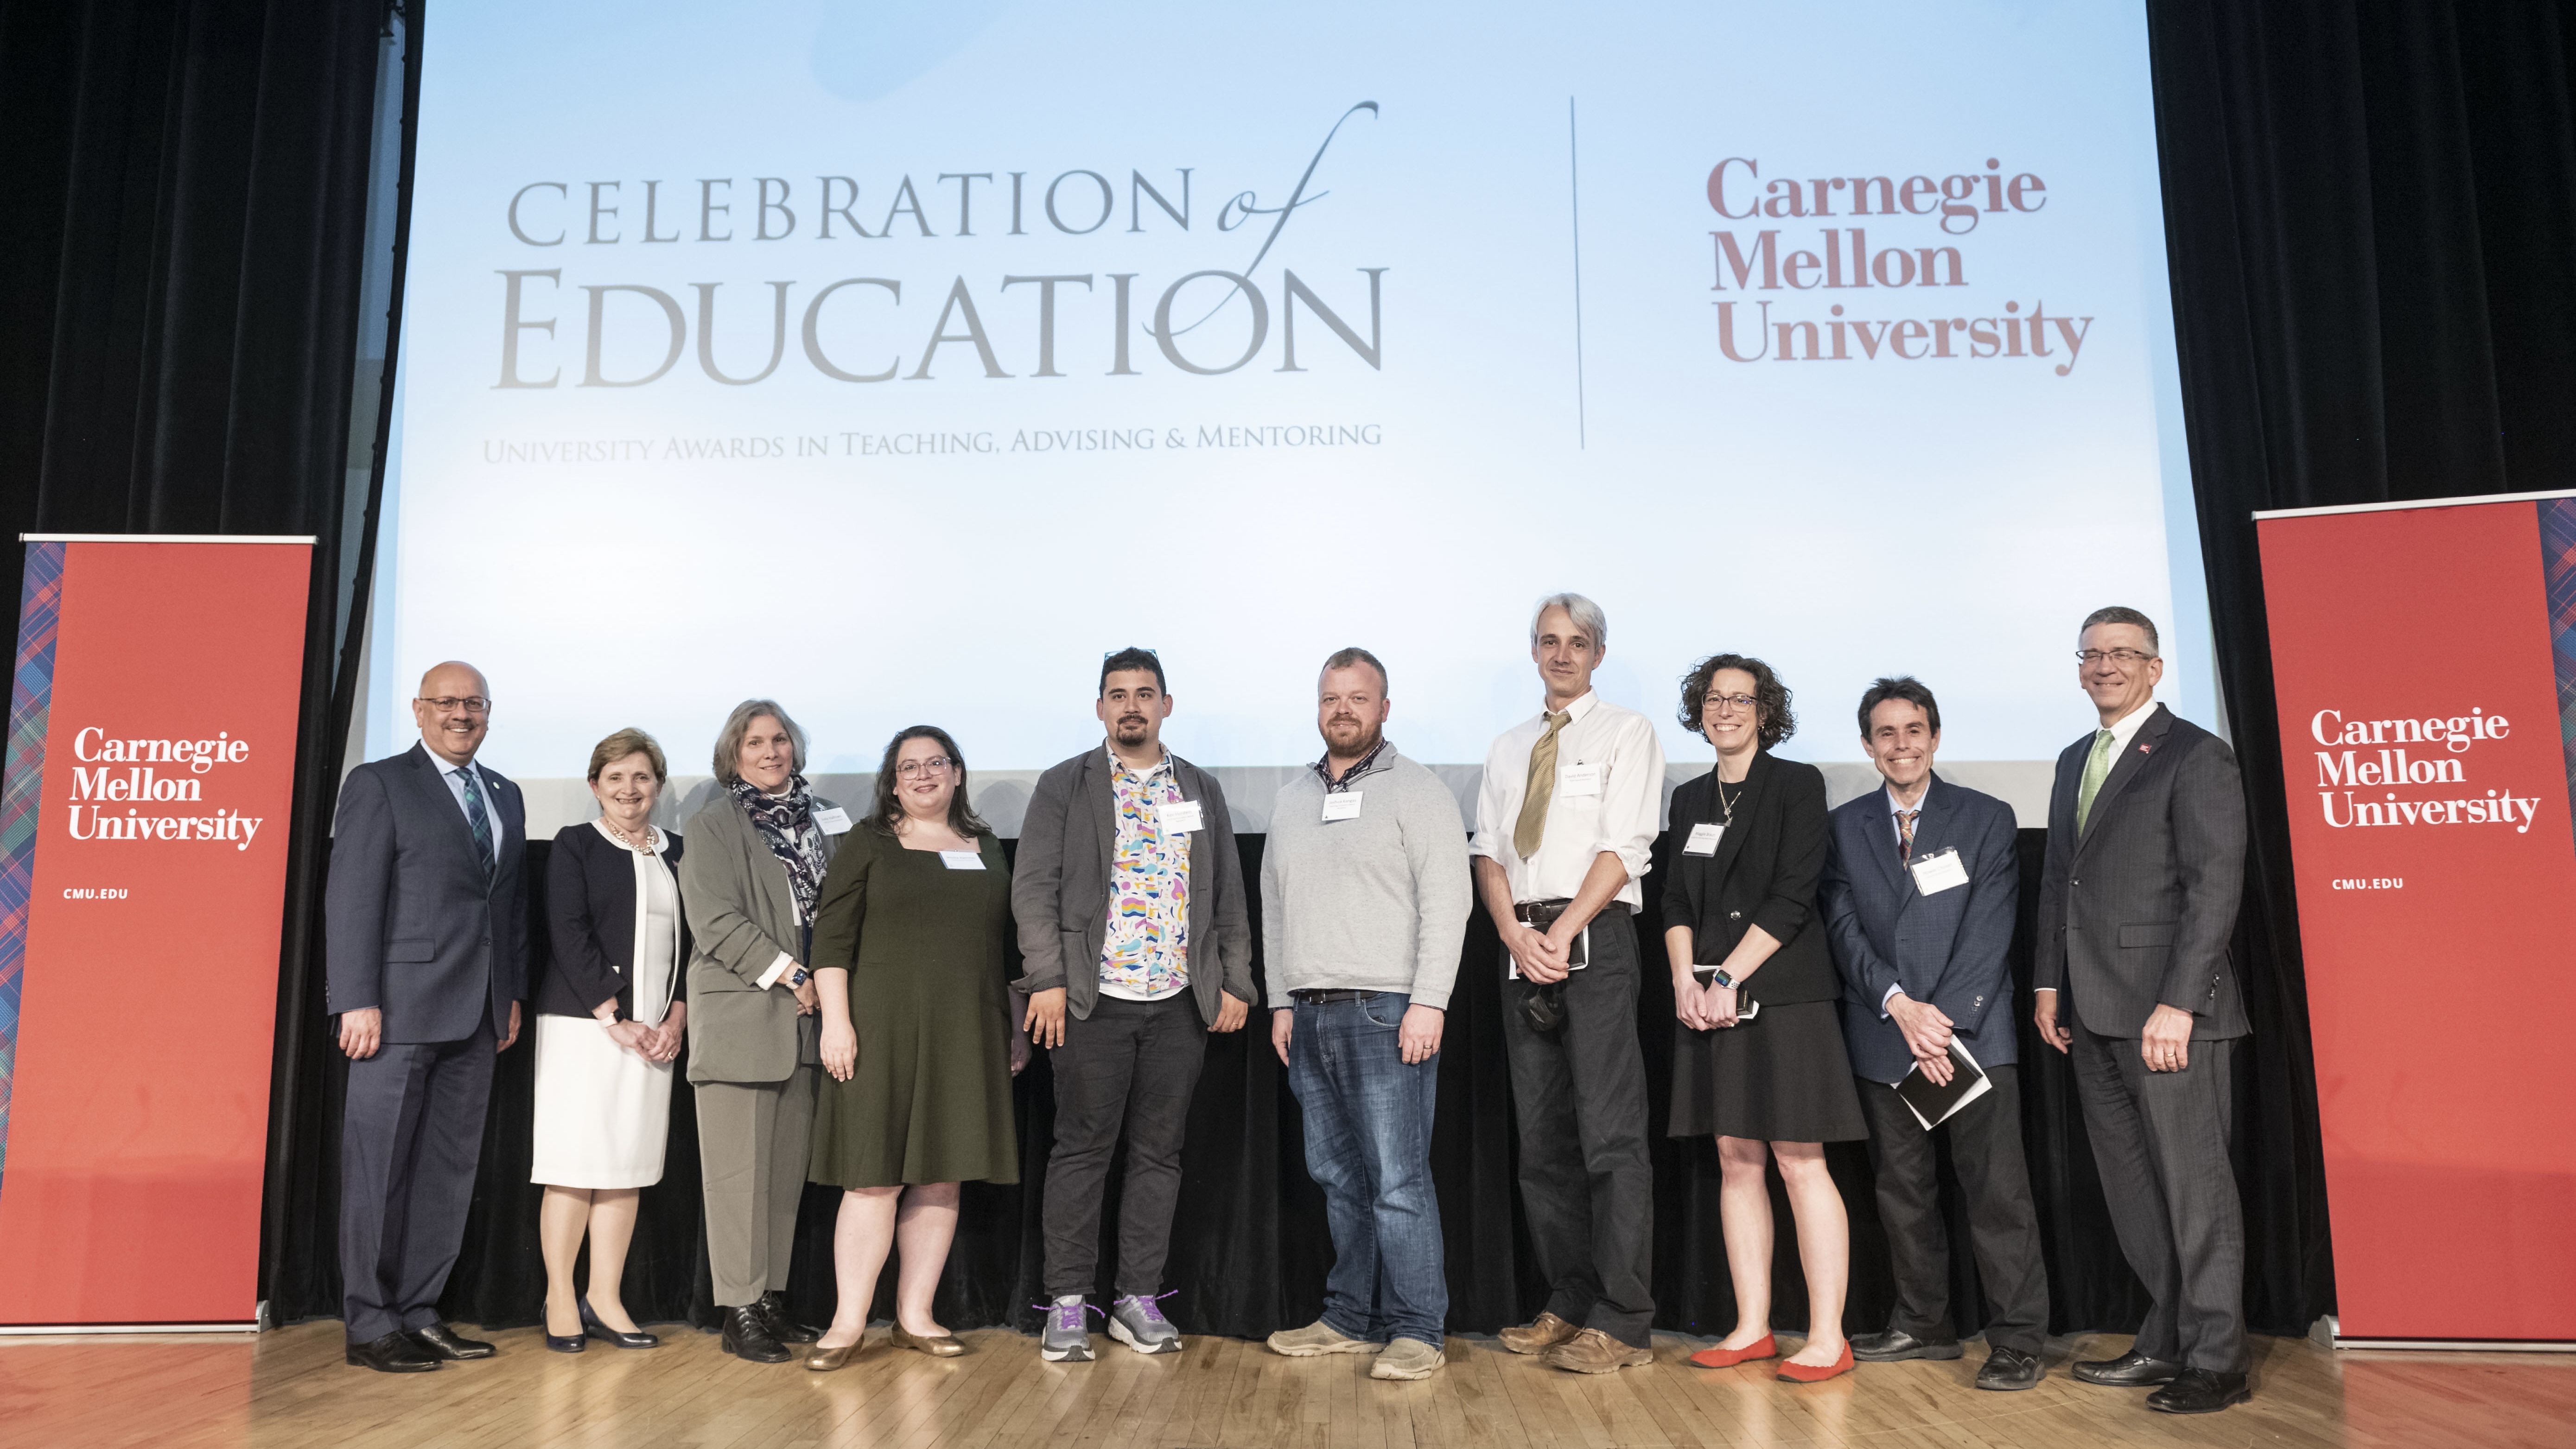 A group of honorees stand together on stage during the Celebration of Education awards ceremony